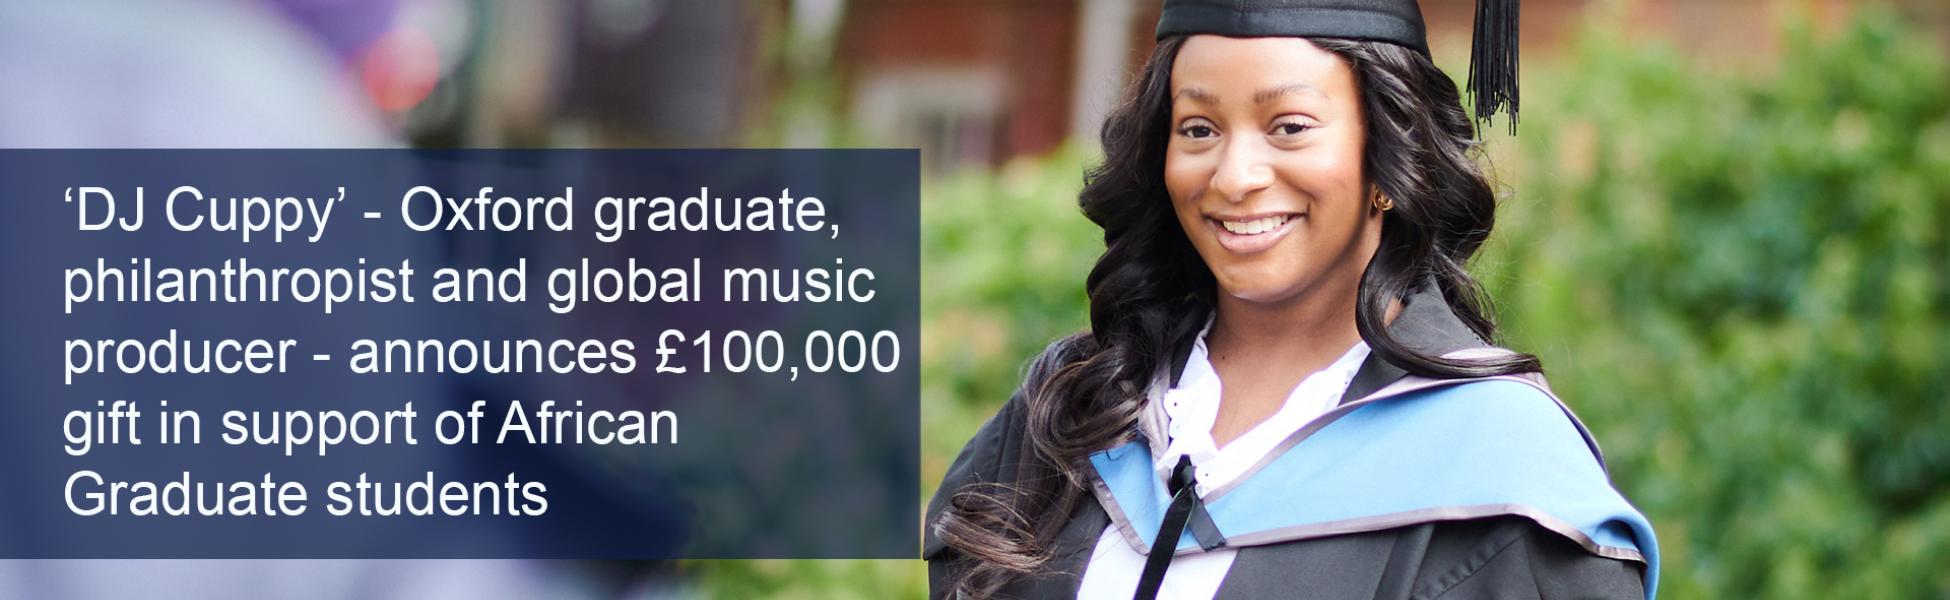 ‘DJ Cuppy’ - Oxford graduate, philanthropist and global music producer - announces £100,000 gift in support of African Graduate students